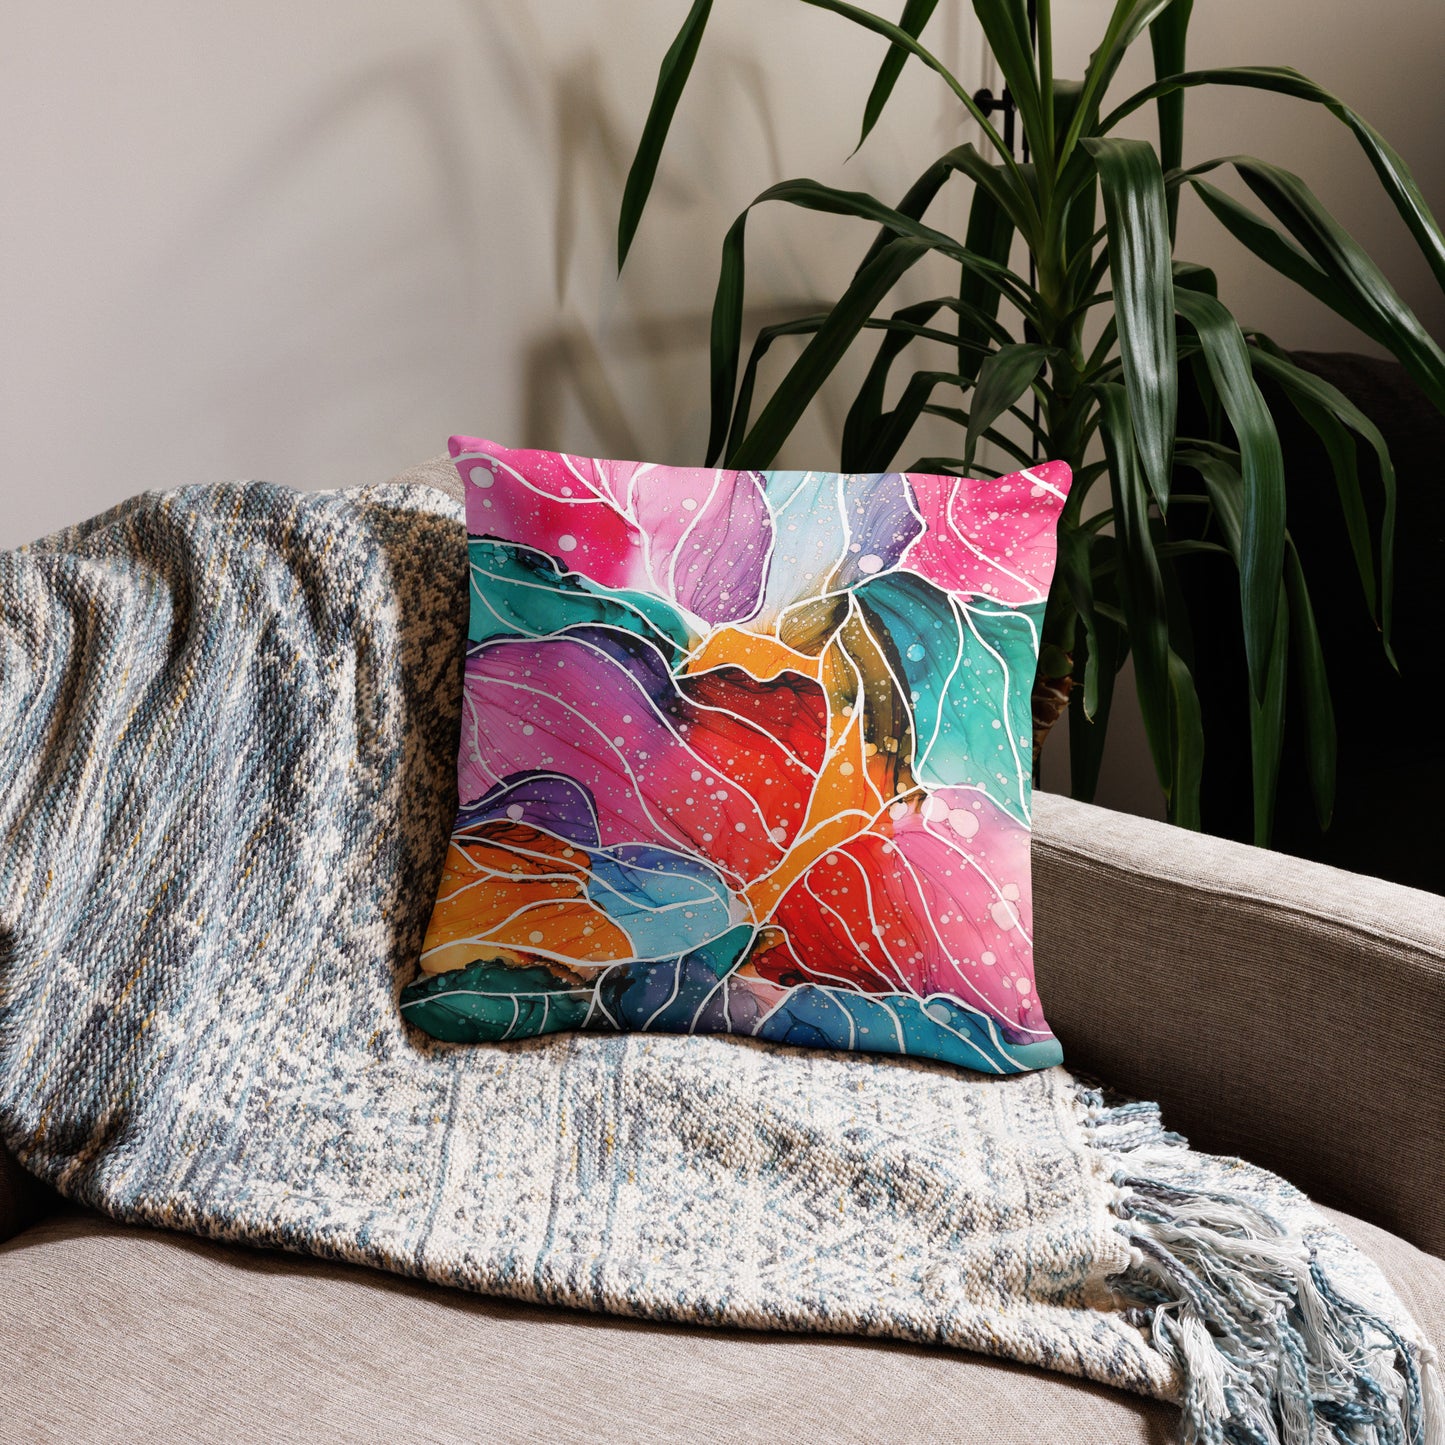 Colorful Throw Pillow Cover - "New Beginnings"